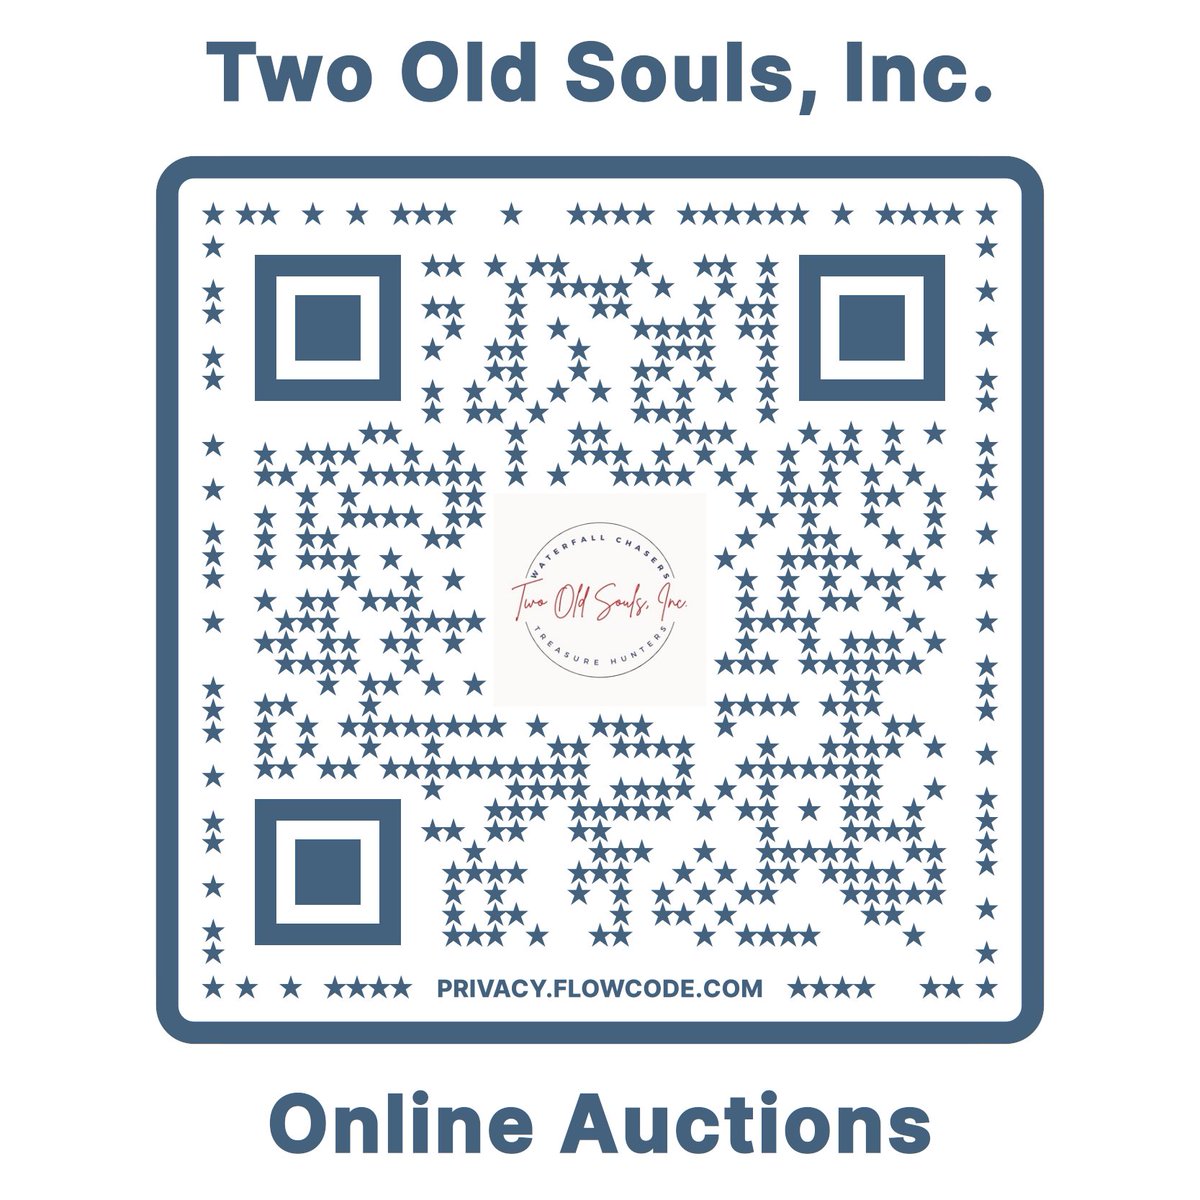 Here is a quick way to access our online auction this week - give it a scan to view our items! 
#onlineauctions #vintage #Ohio #TwoOldSoulsInc @oldtimeyvintage #collectibles #smallbusinessowner